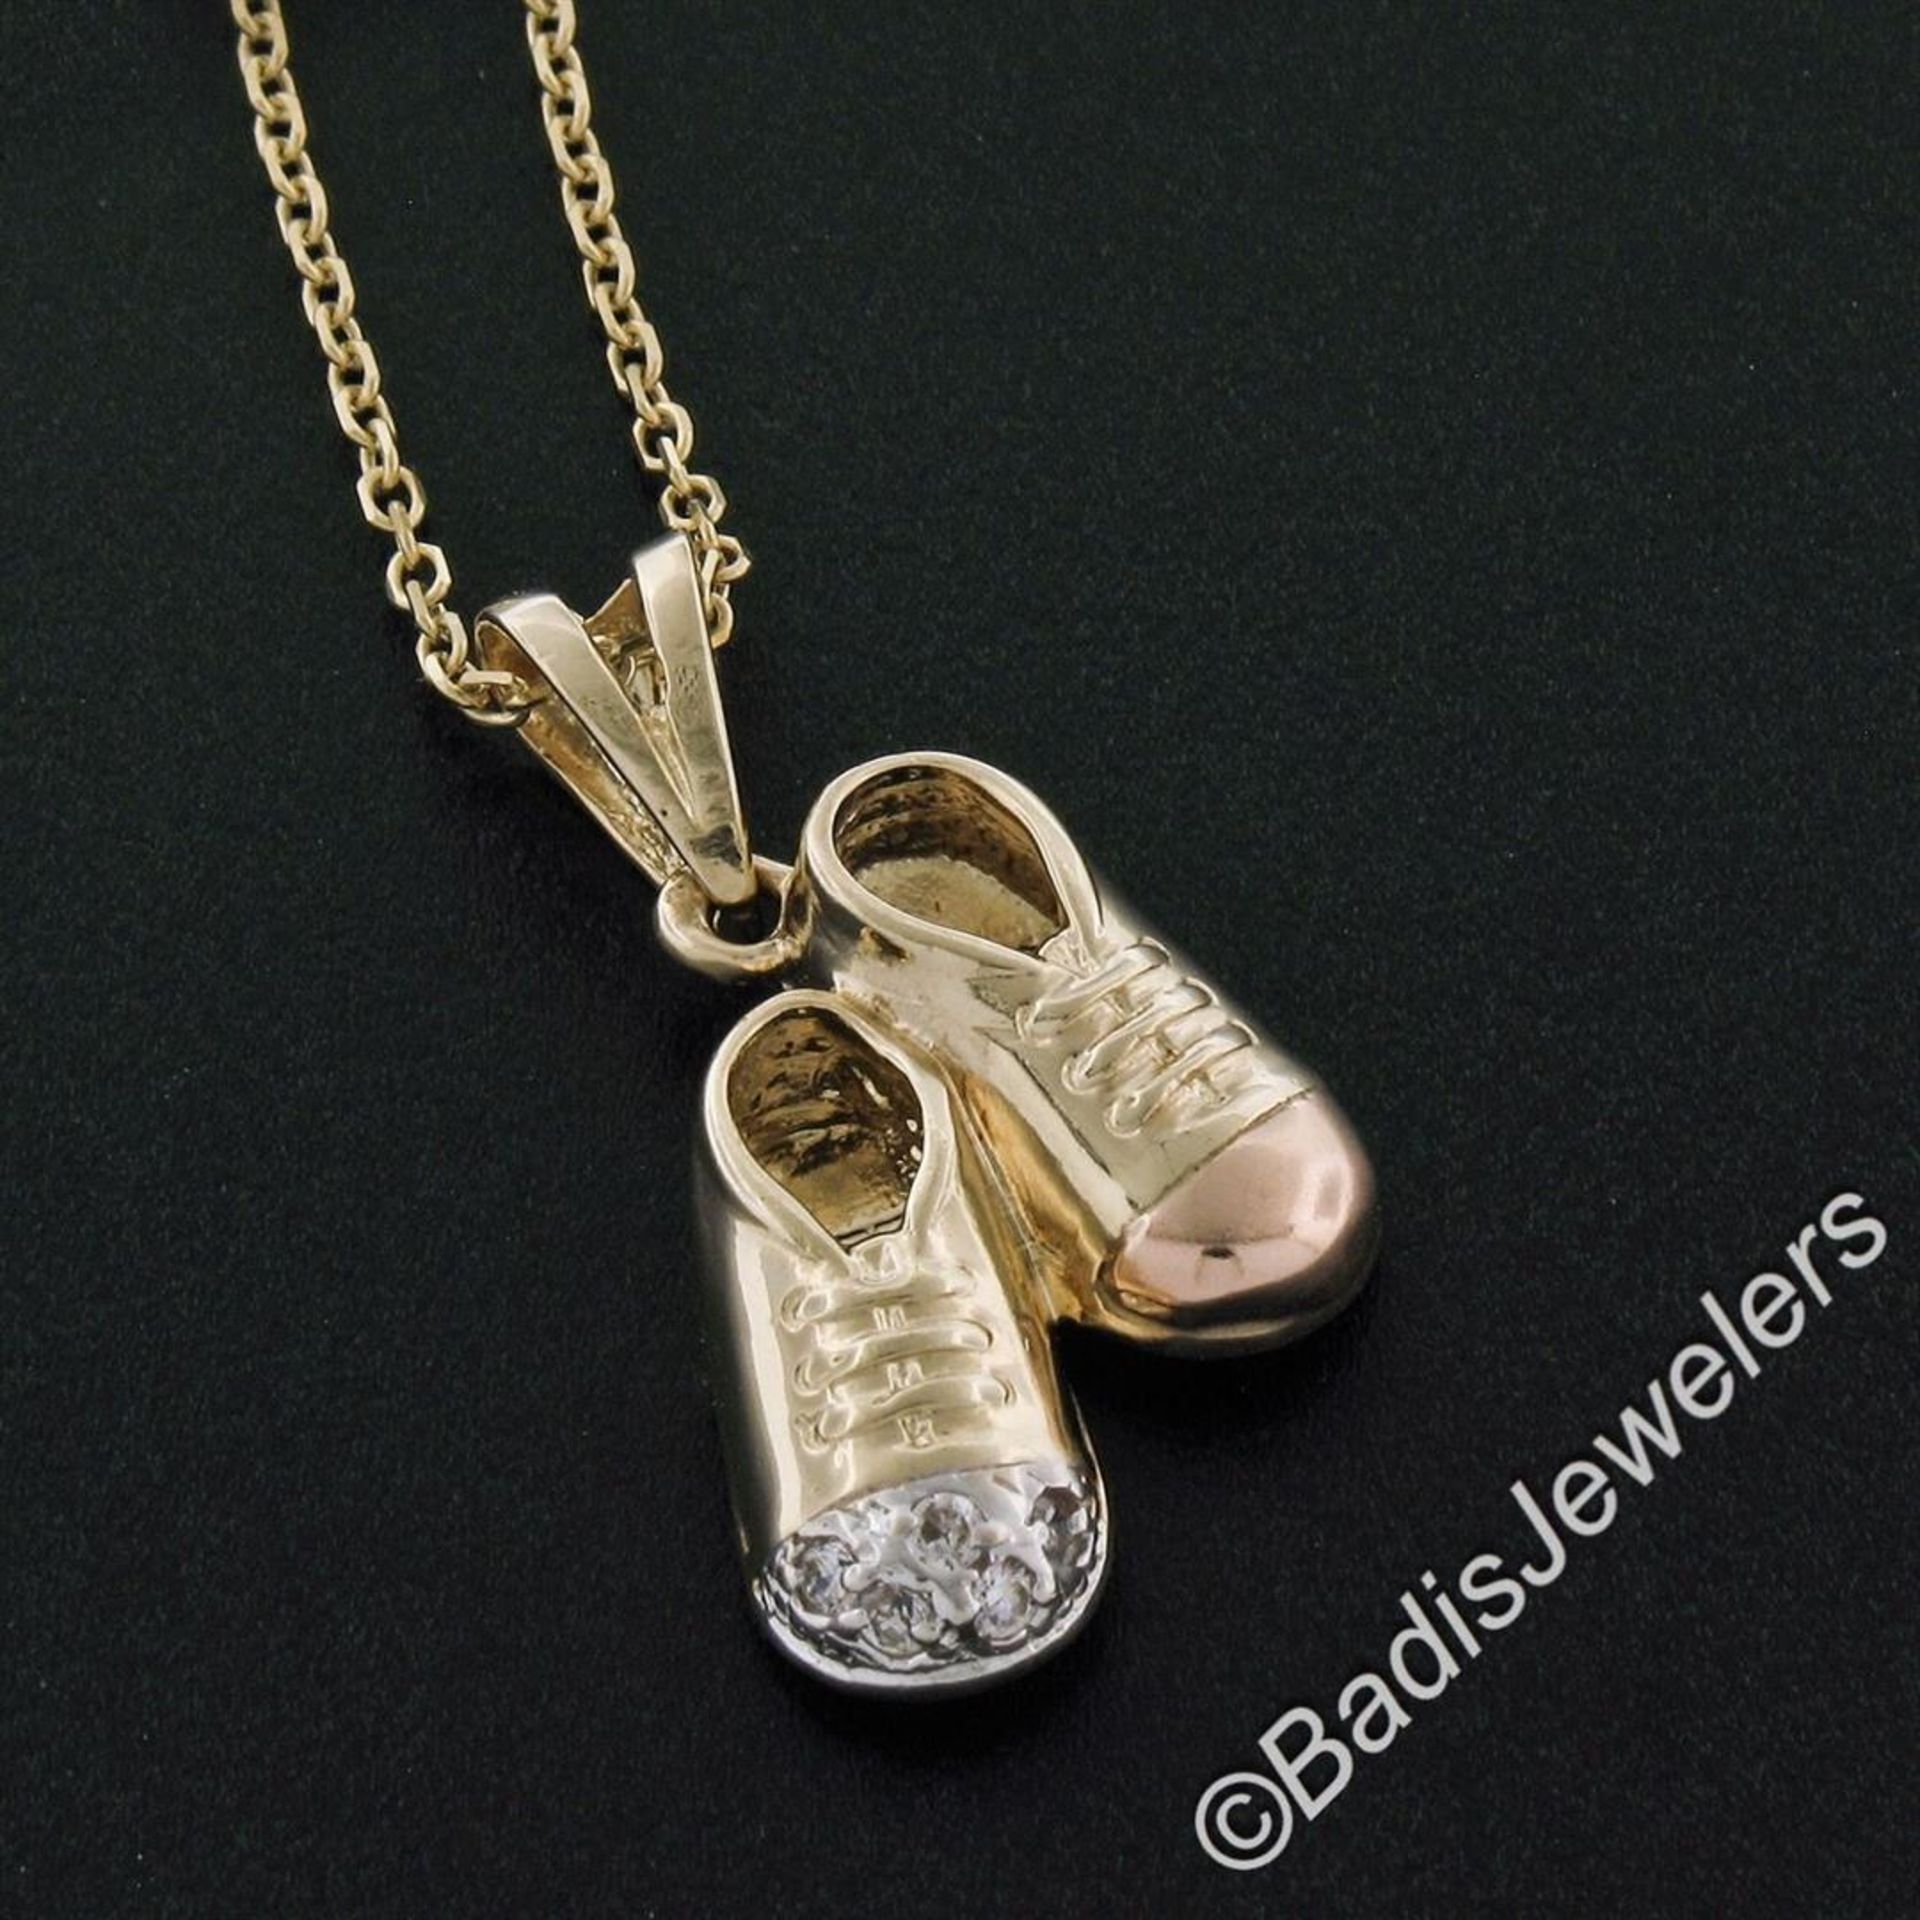 14kt Yellow White and Rose Gold Dual Baby Shoe Pendant Necklace w/ 5 Round Diamo - Image 3 of 8